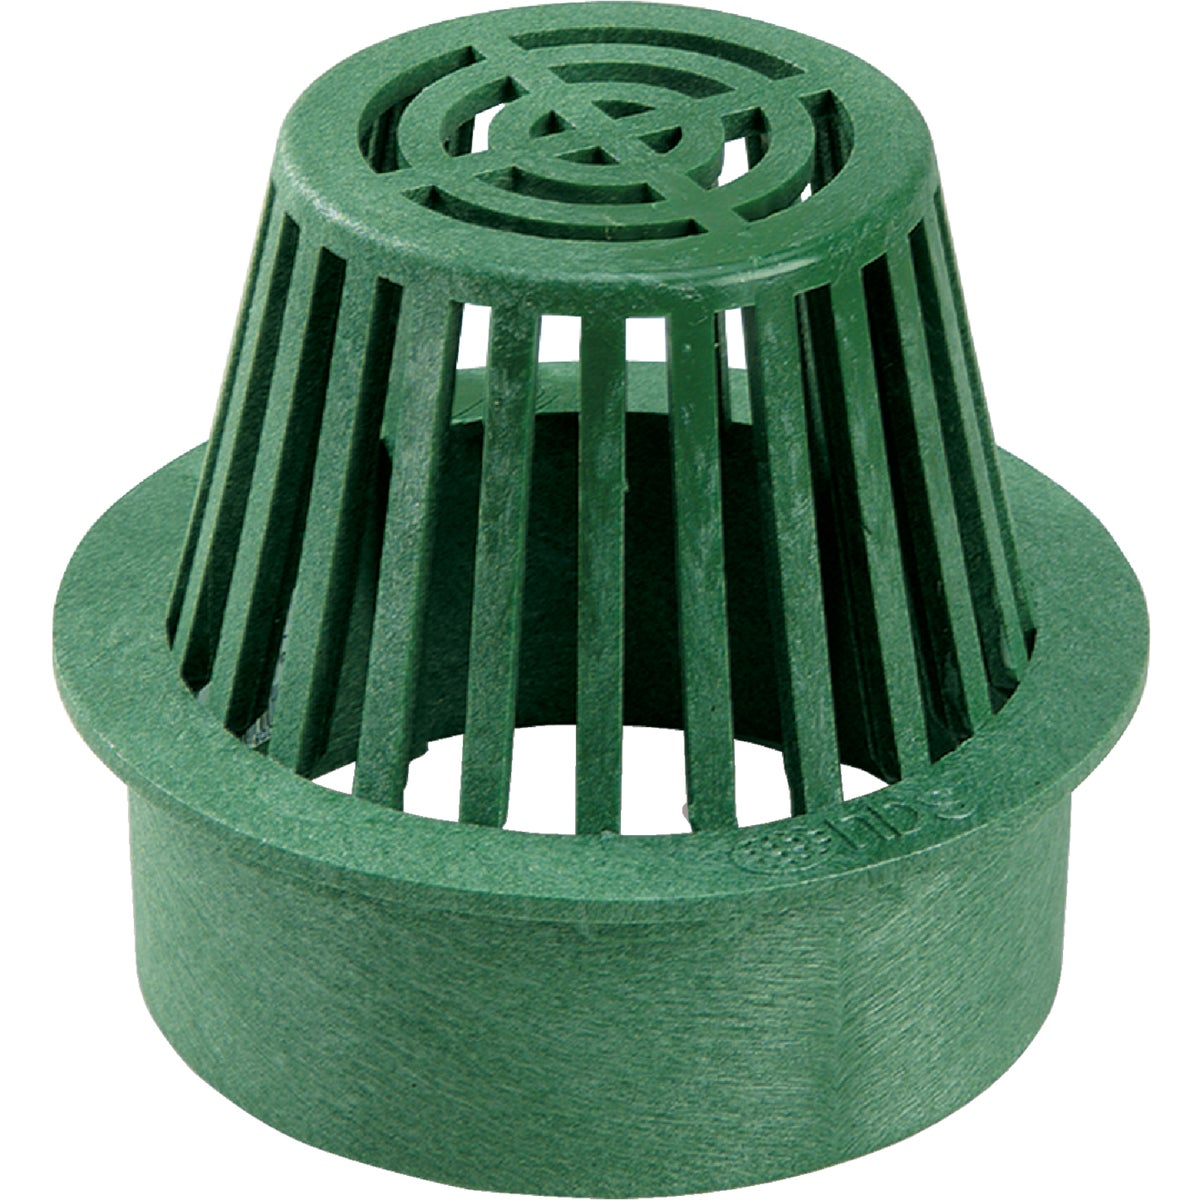 Item 435430, Fits Spee-D basin, 6" sewer and drain pipe and fittings and 6" corrugated 